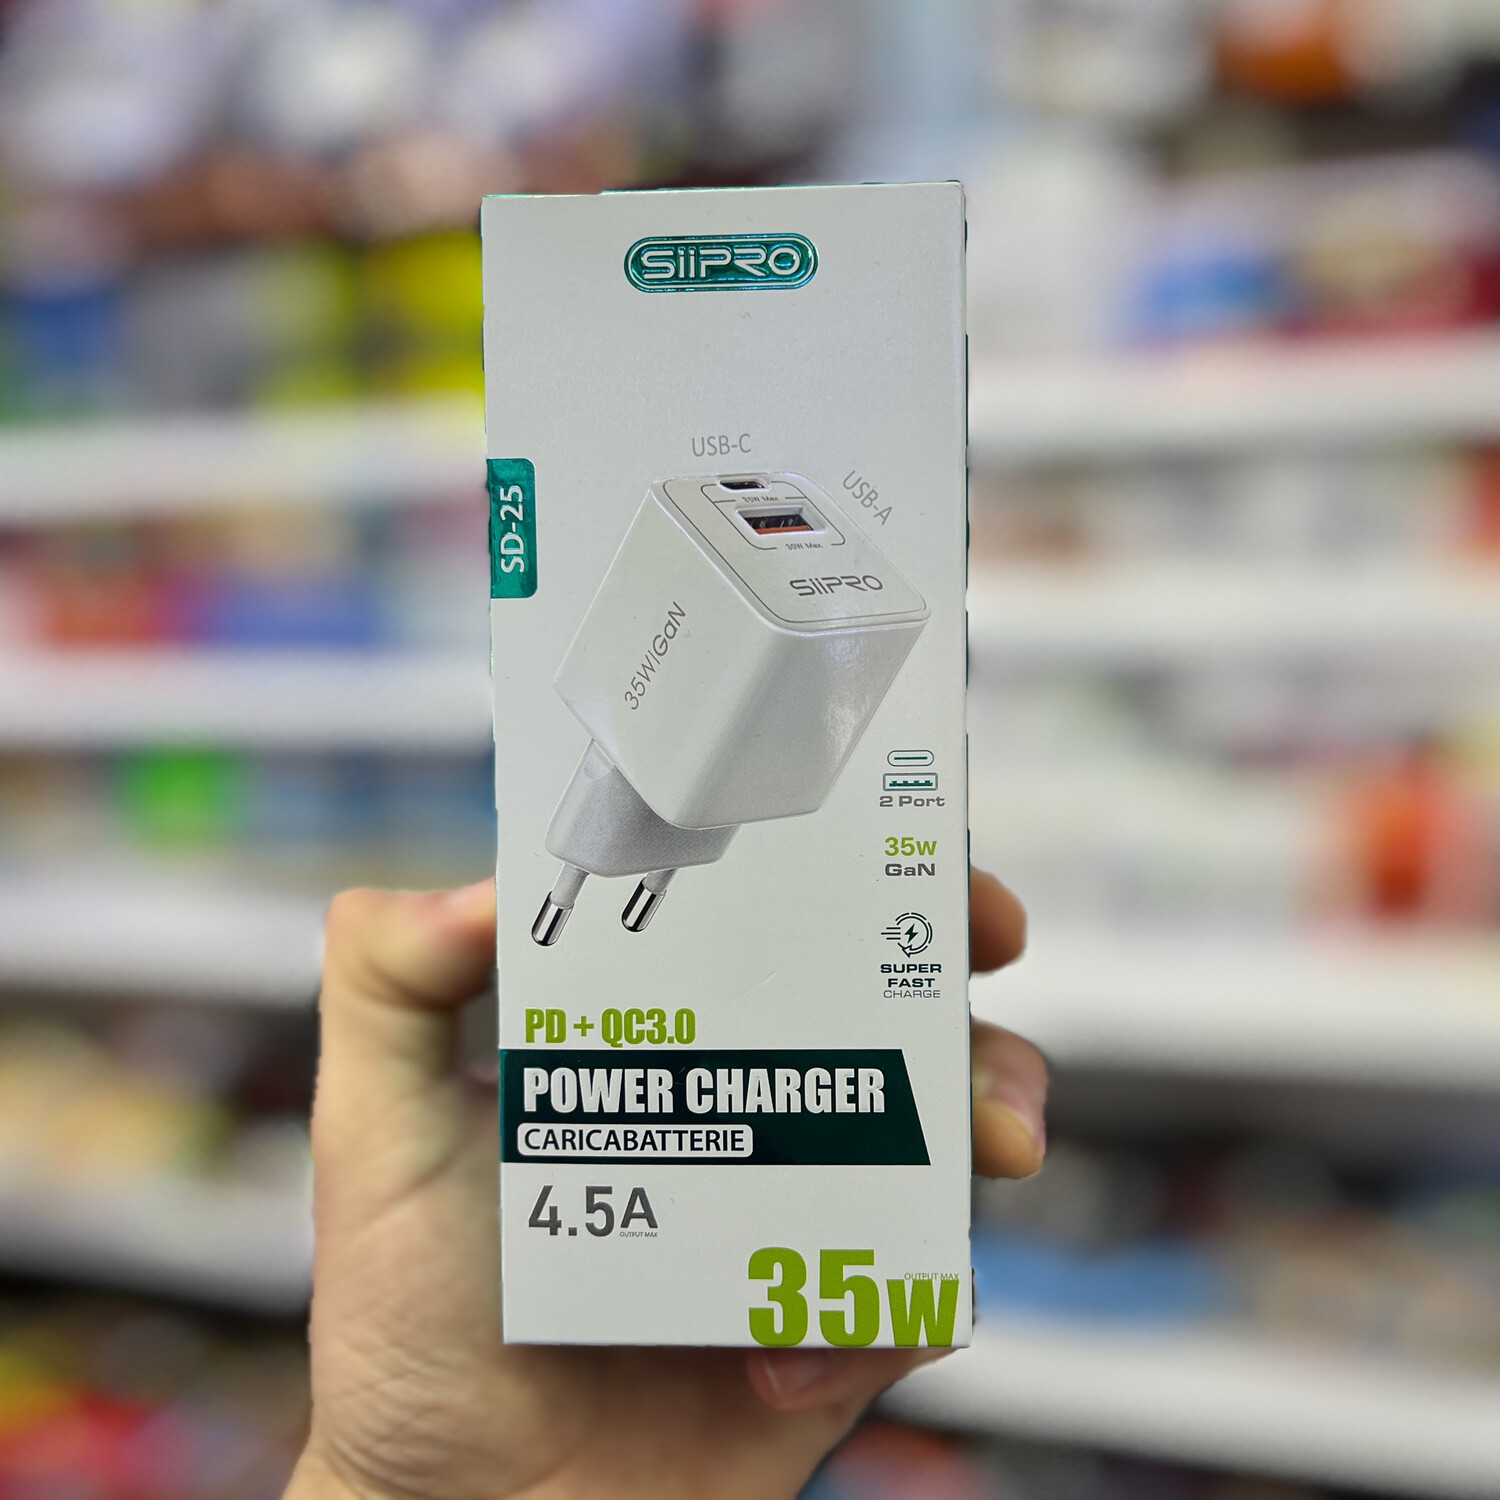 Power charger caricabatterie PD+QC3.0 35w 4.5 A 2 porte siipro.